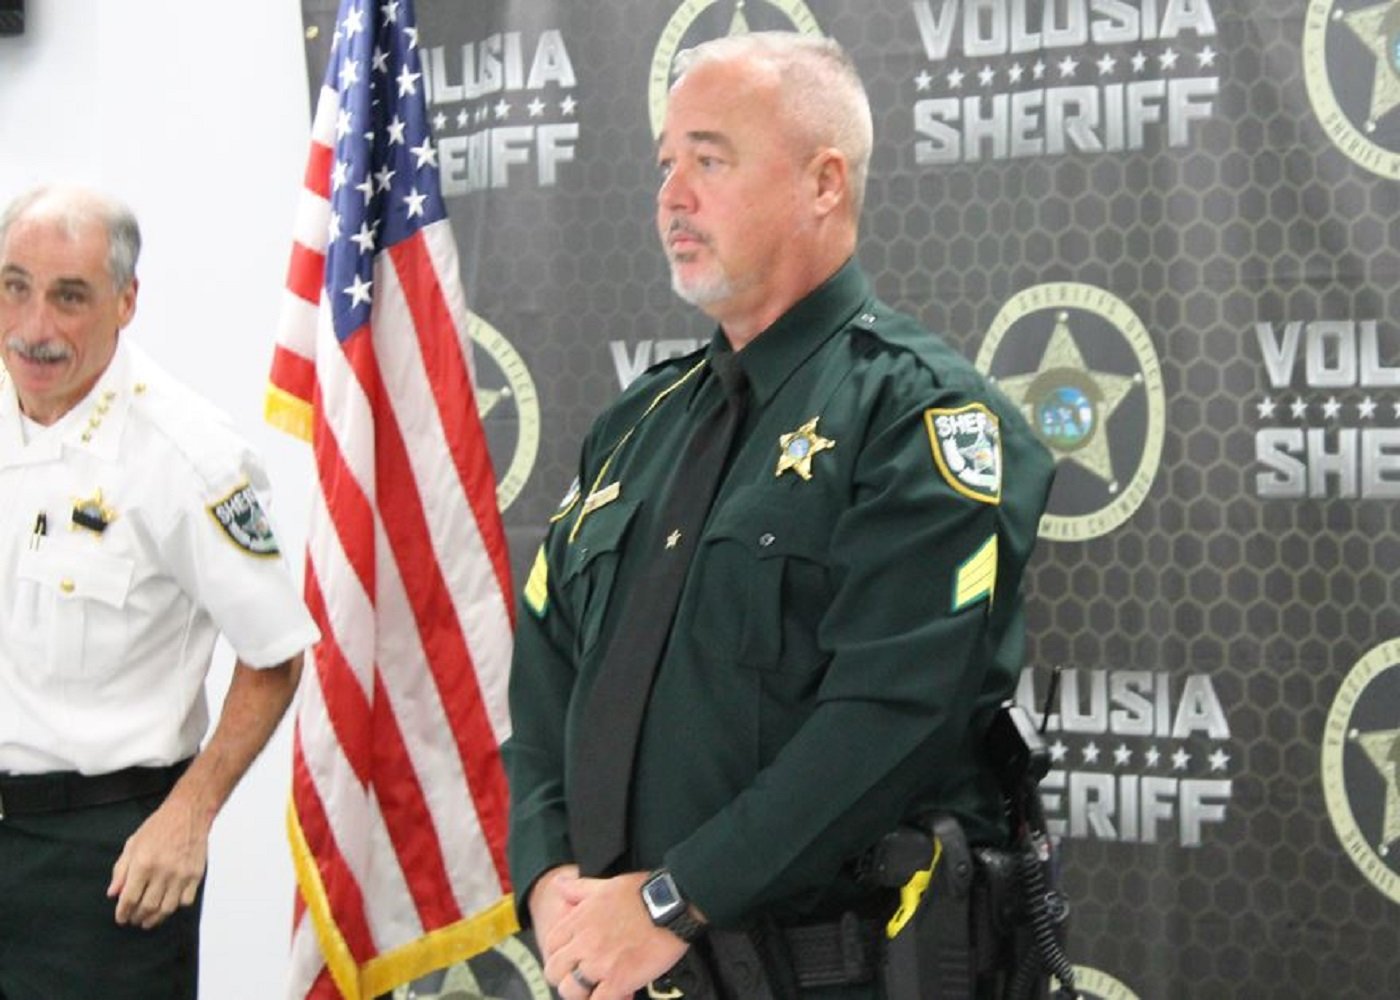 VSO Sergeant Don Maxwell with Sheriff Mike Chitwood